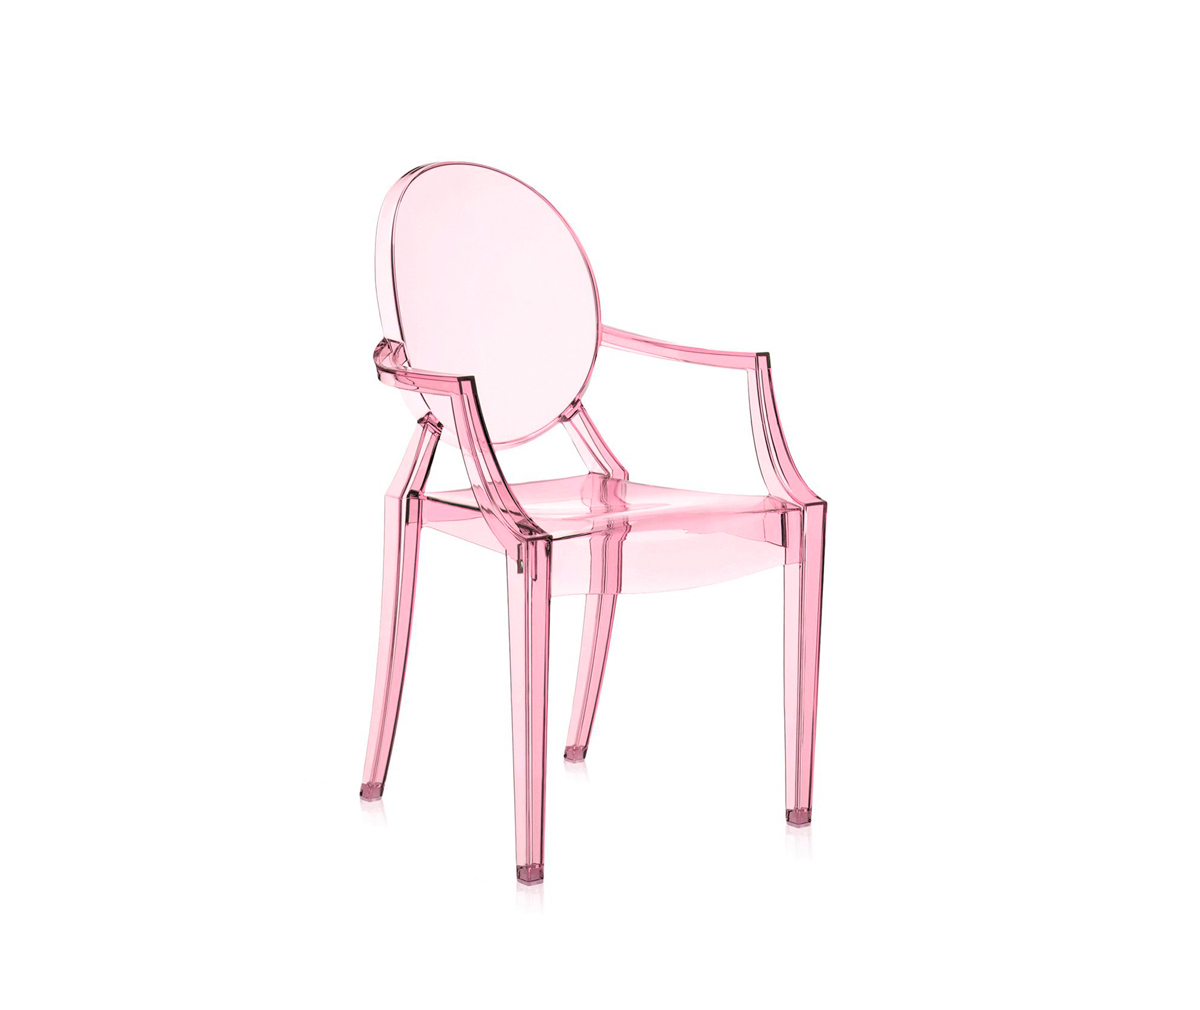 Lou Lou Ghost Children's Chair